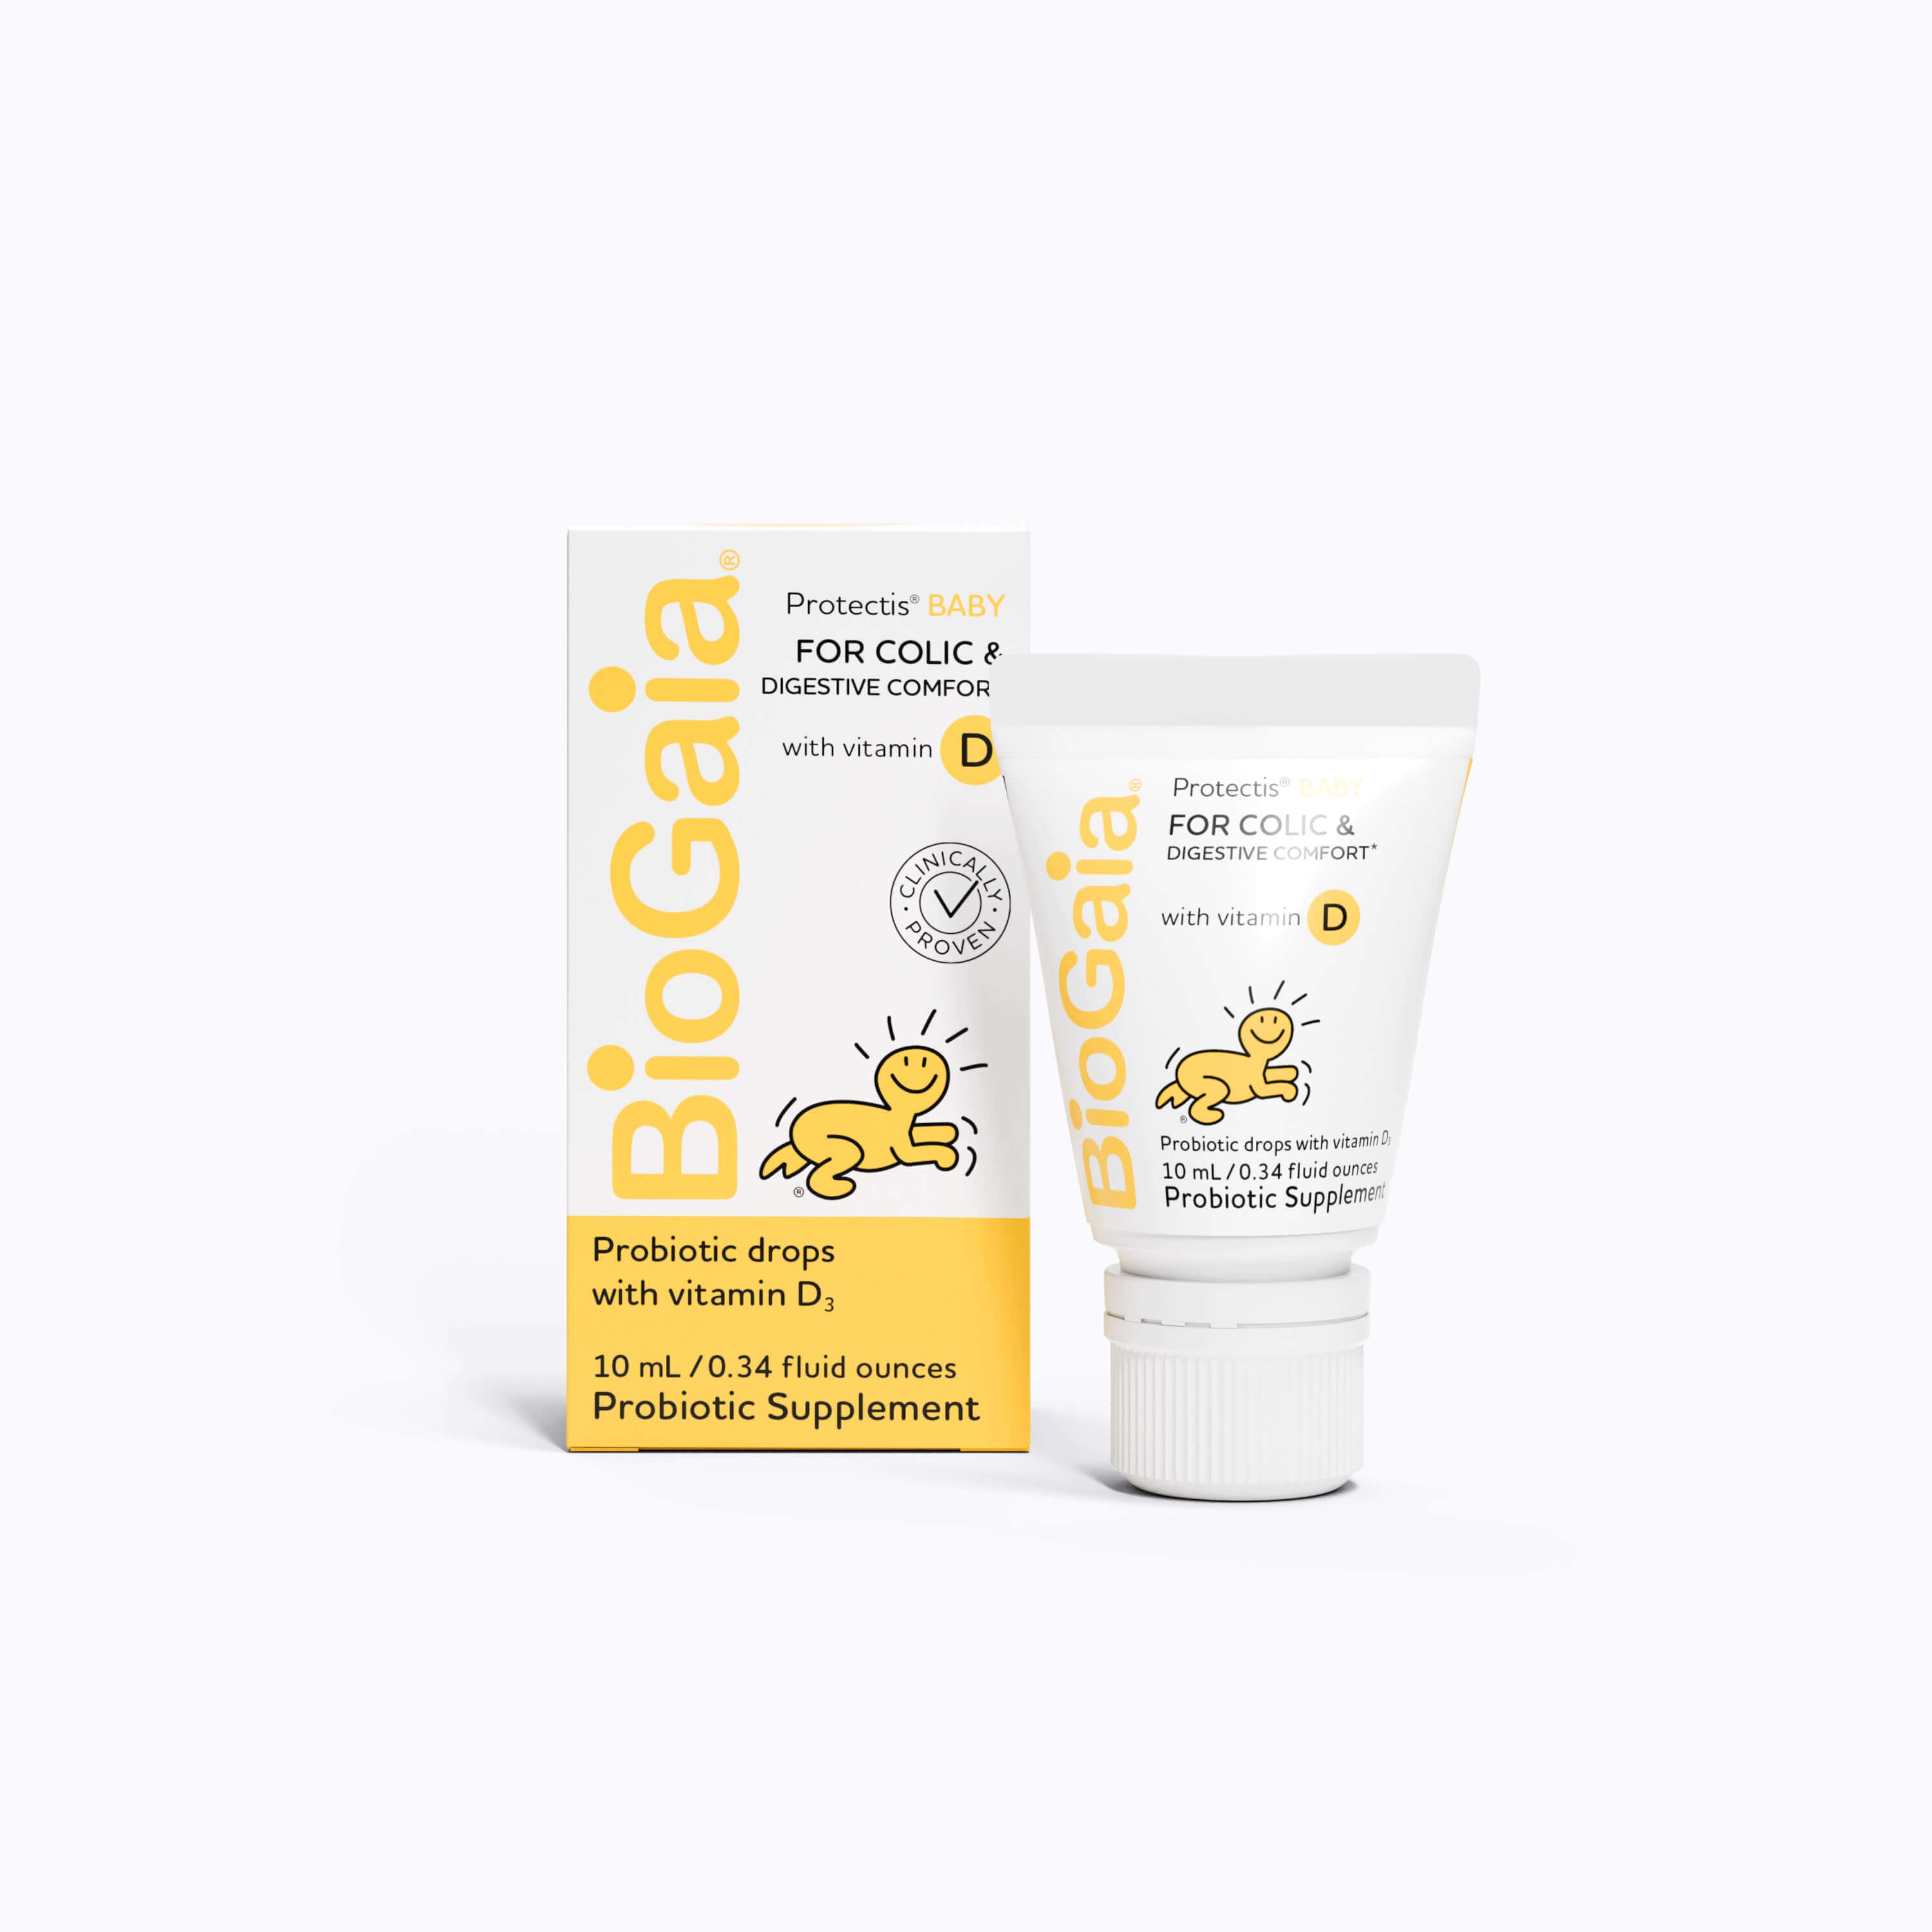 BioGaia Protectis BABY with Vitamin D - Probiotic Drops